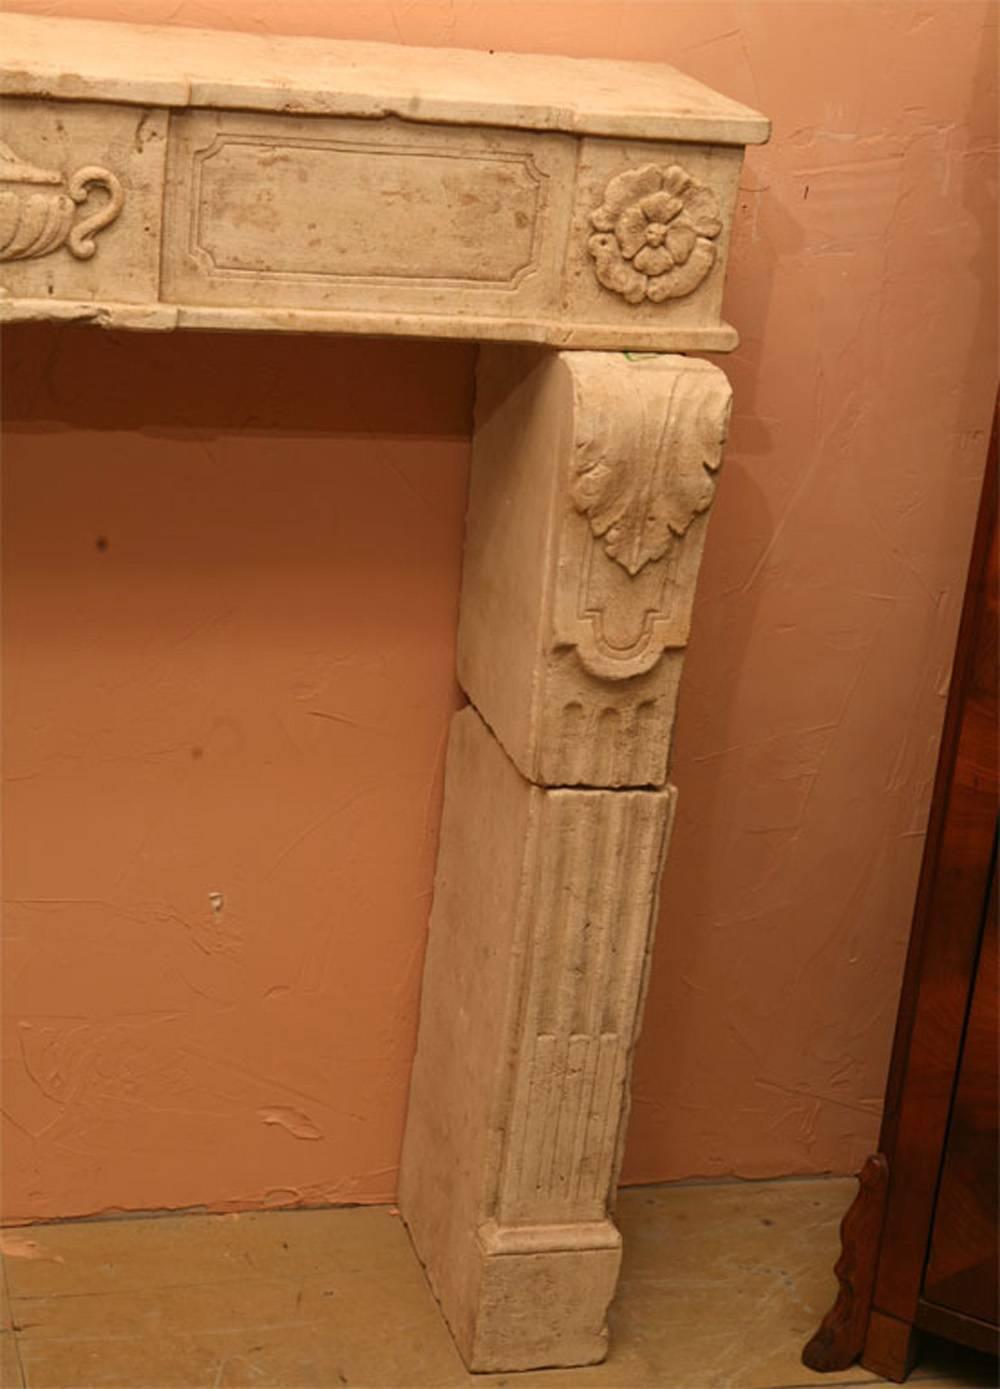 Unusual classical Louis XVI hand-carved limestone fireplace mantel, surround chimneypiece with carved urn and rosettes at the top of pilasters, tapered fluted jam supports that will make your house that much more special. 

Opening is 35.5 x 35.5.